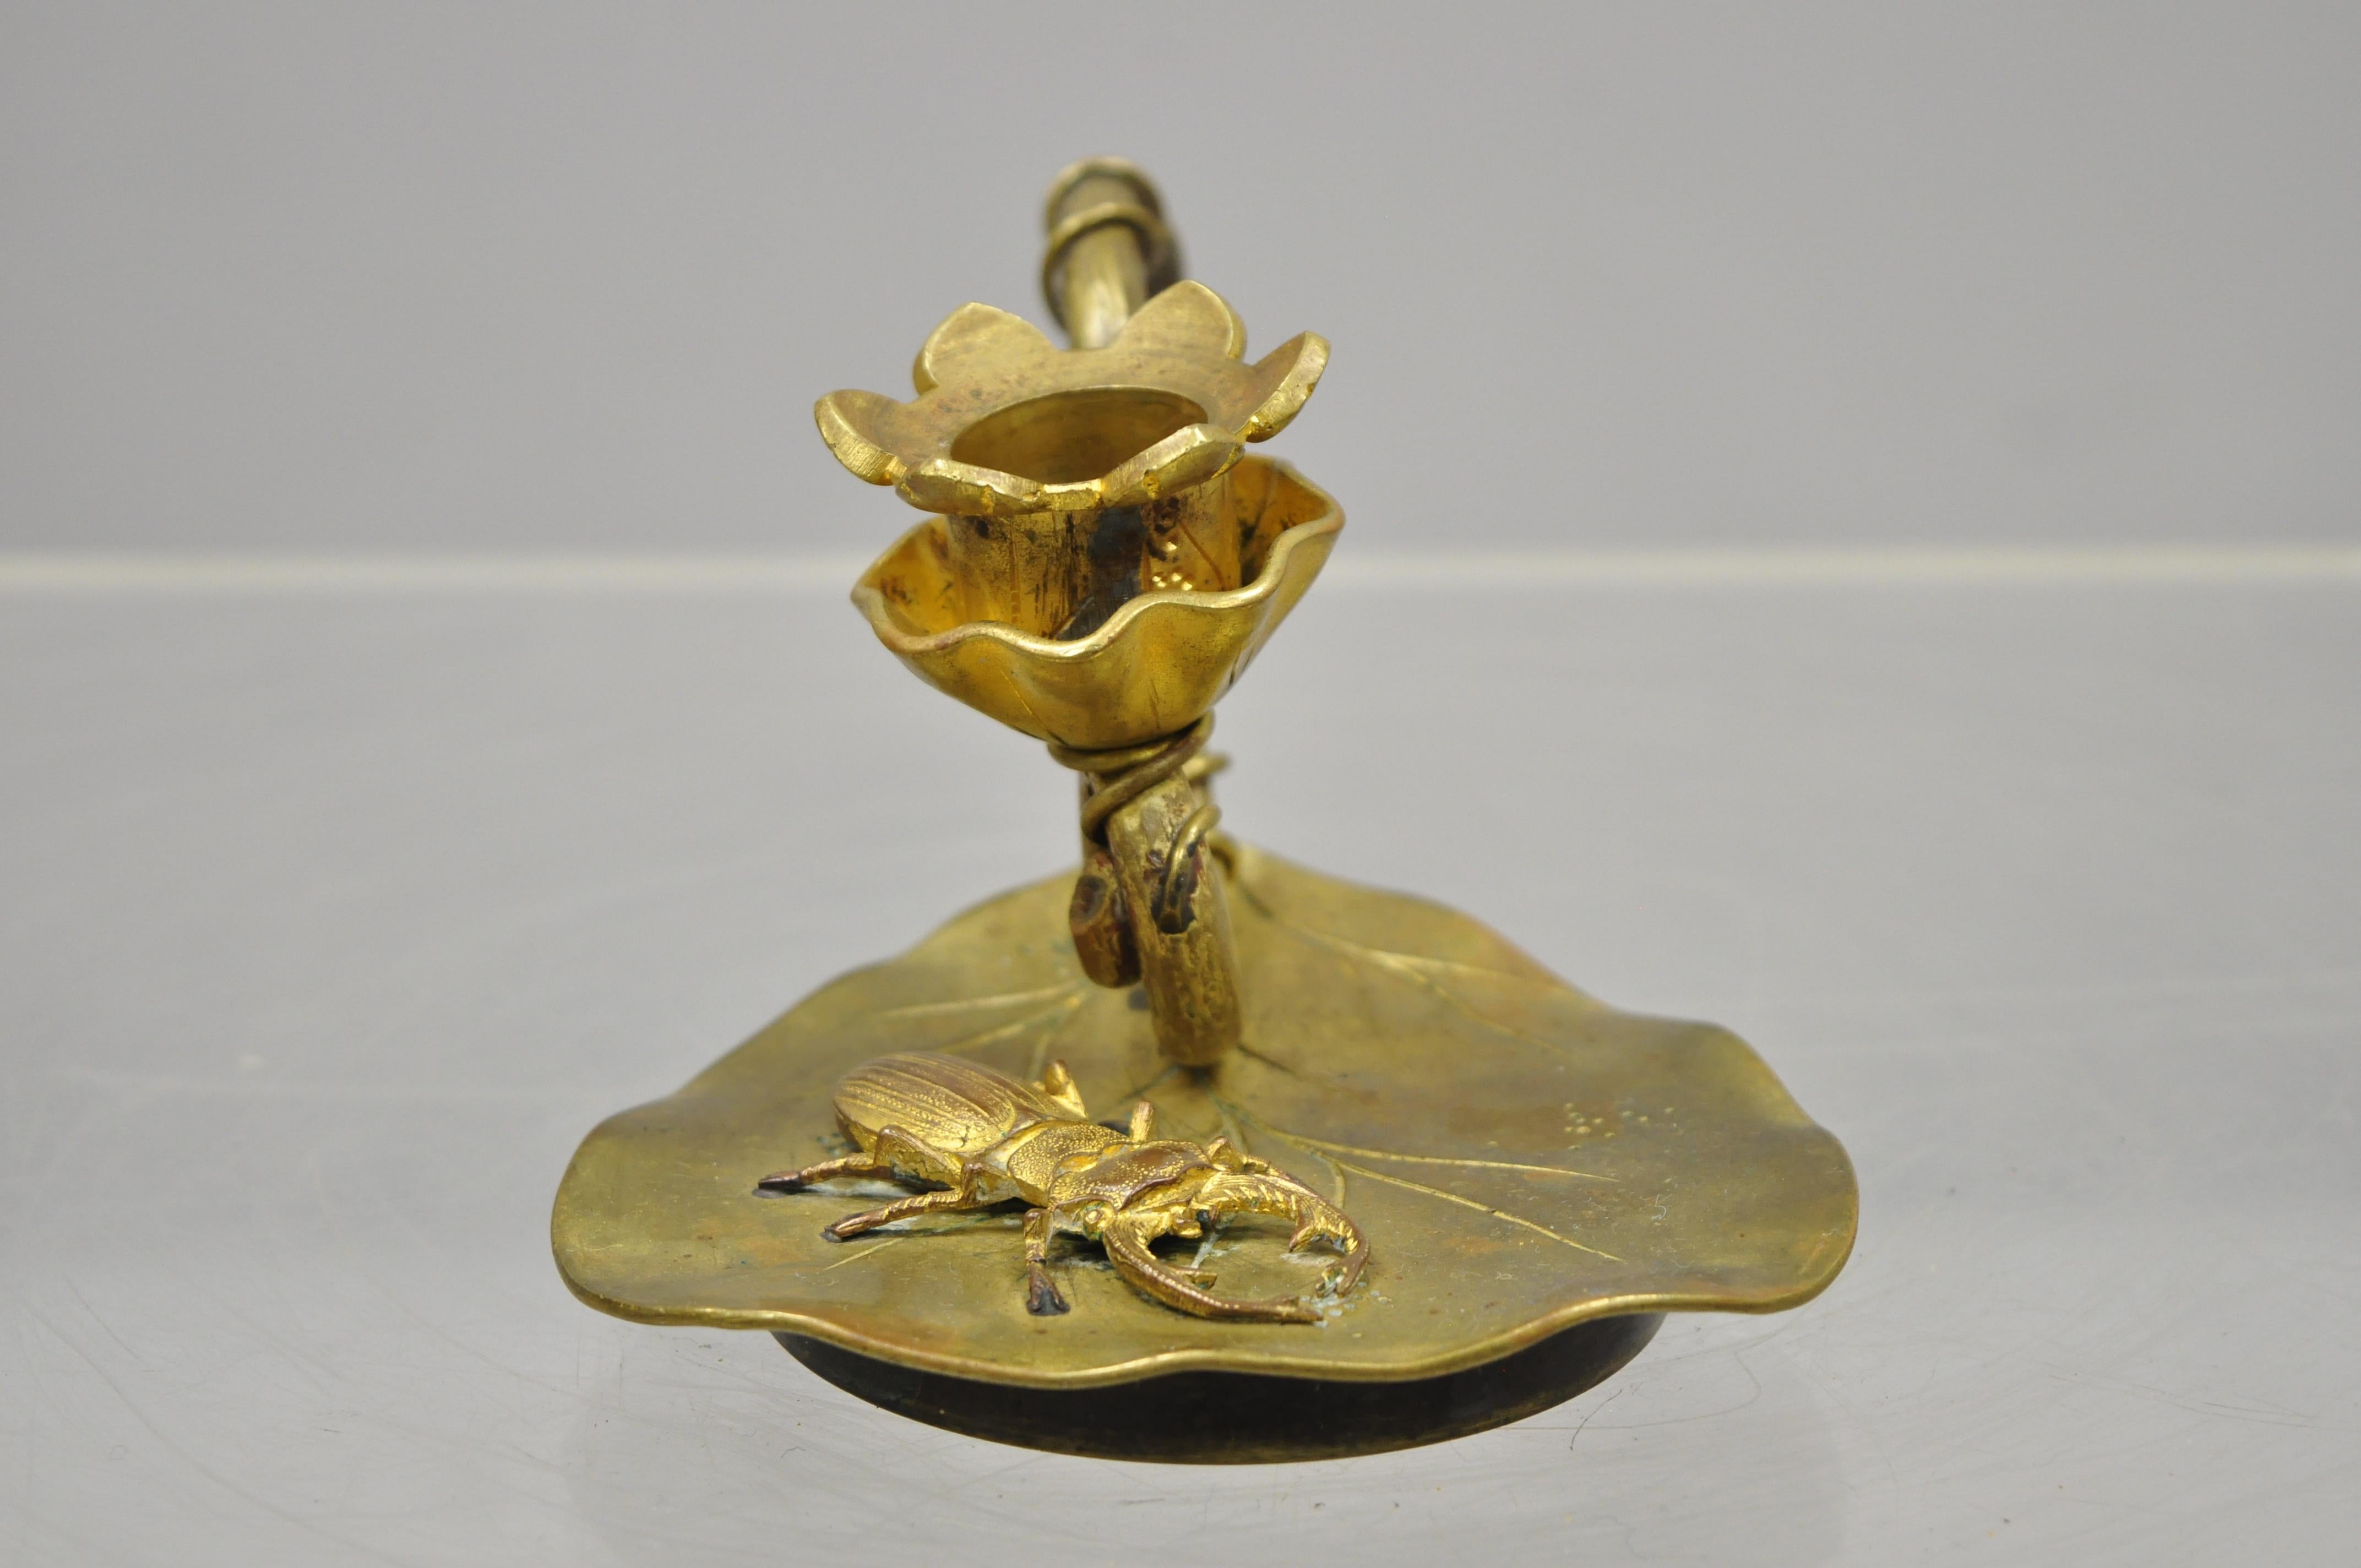 Antique brass bronze stag beetle on lily pad candlestick candleholder, circa early 1900s. Measurements: 3.5